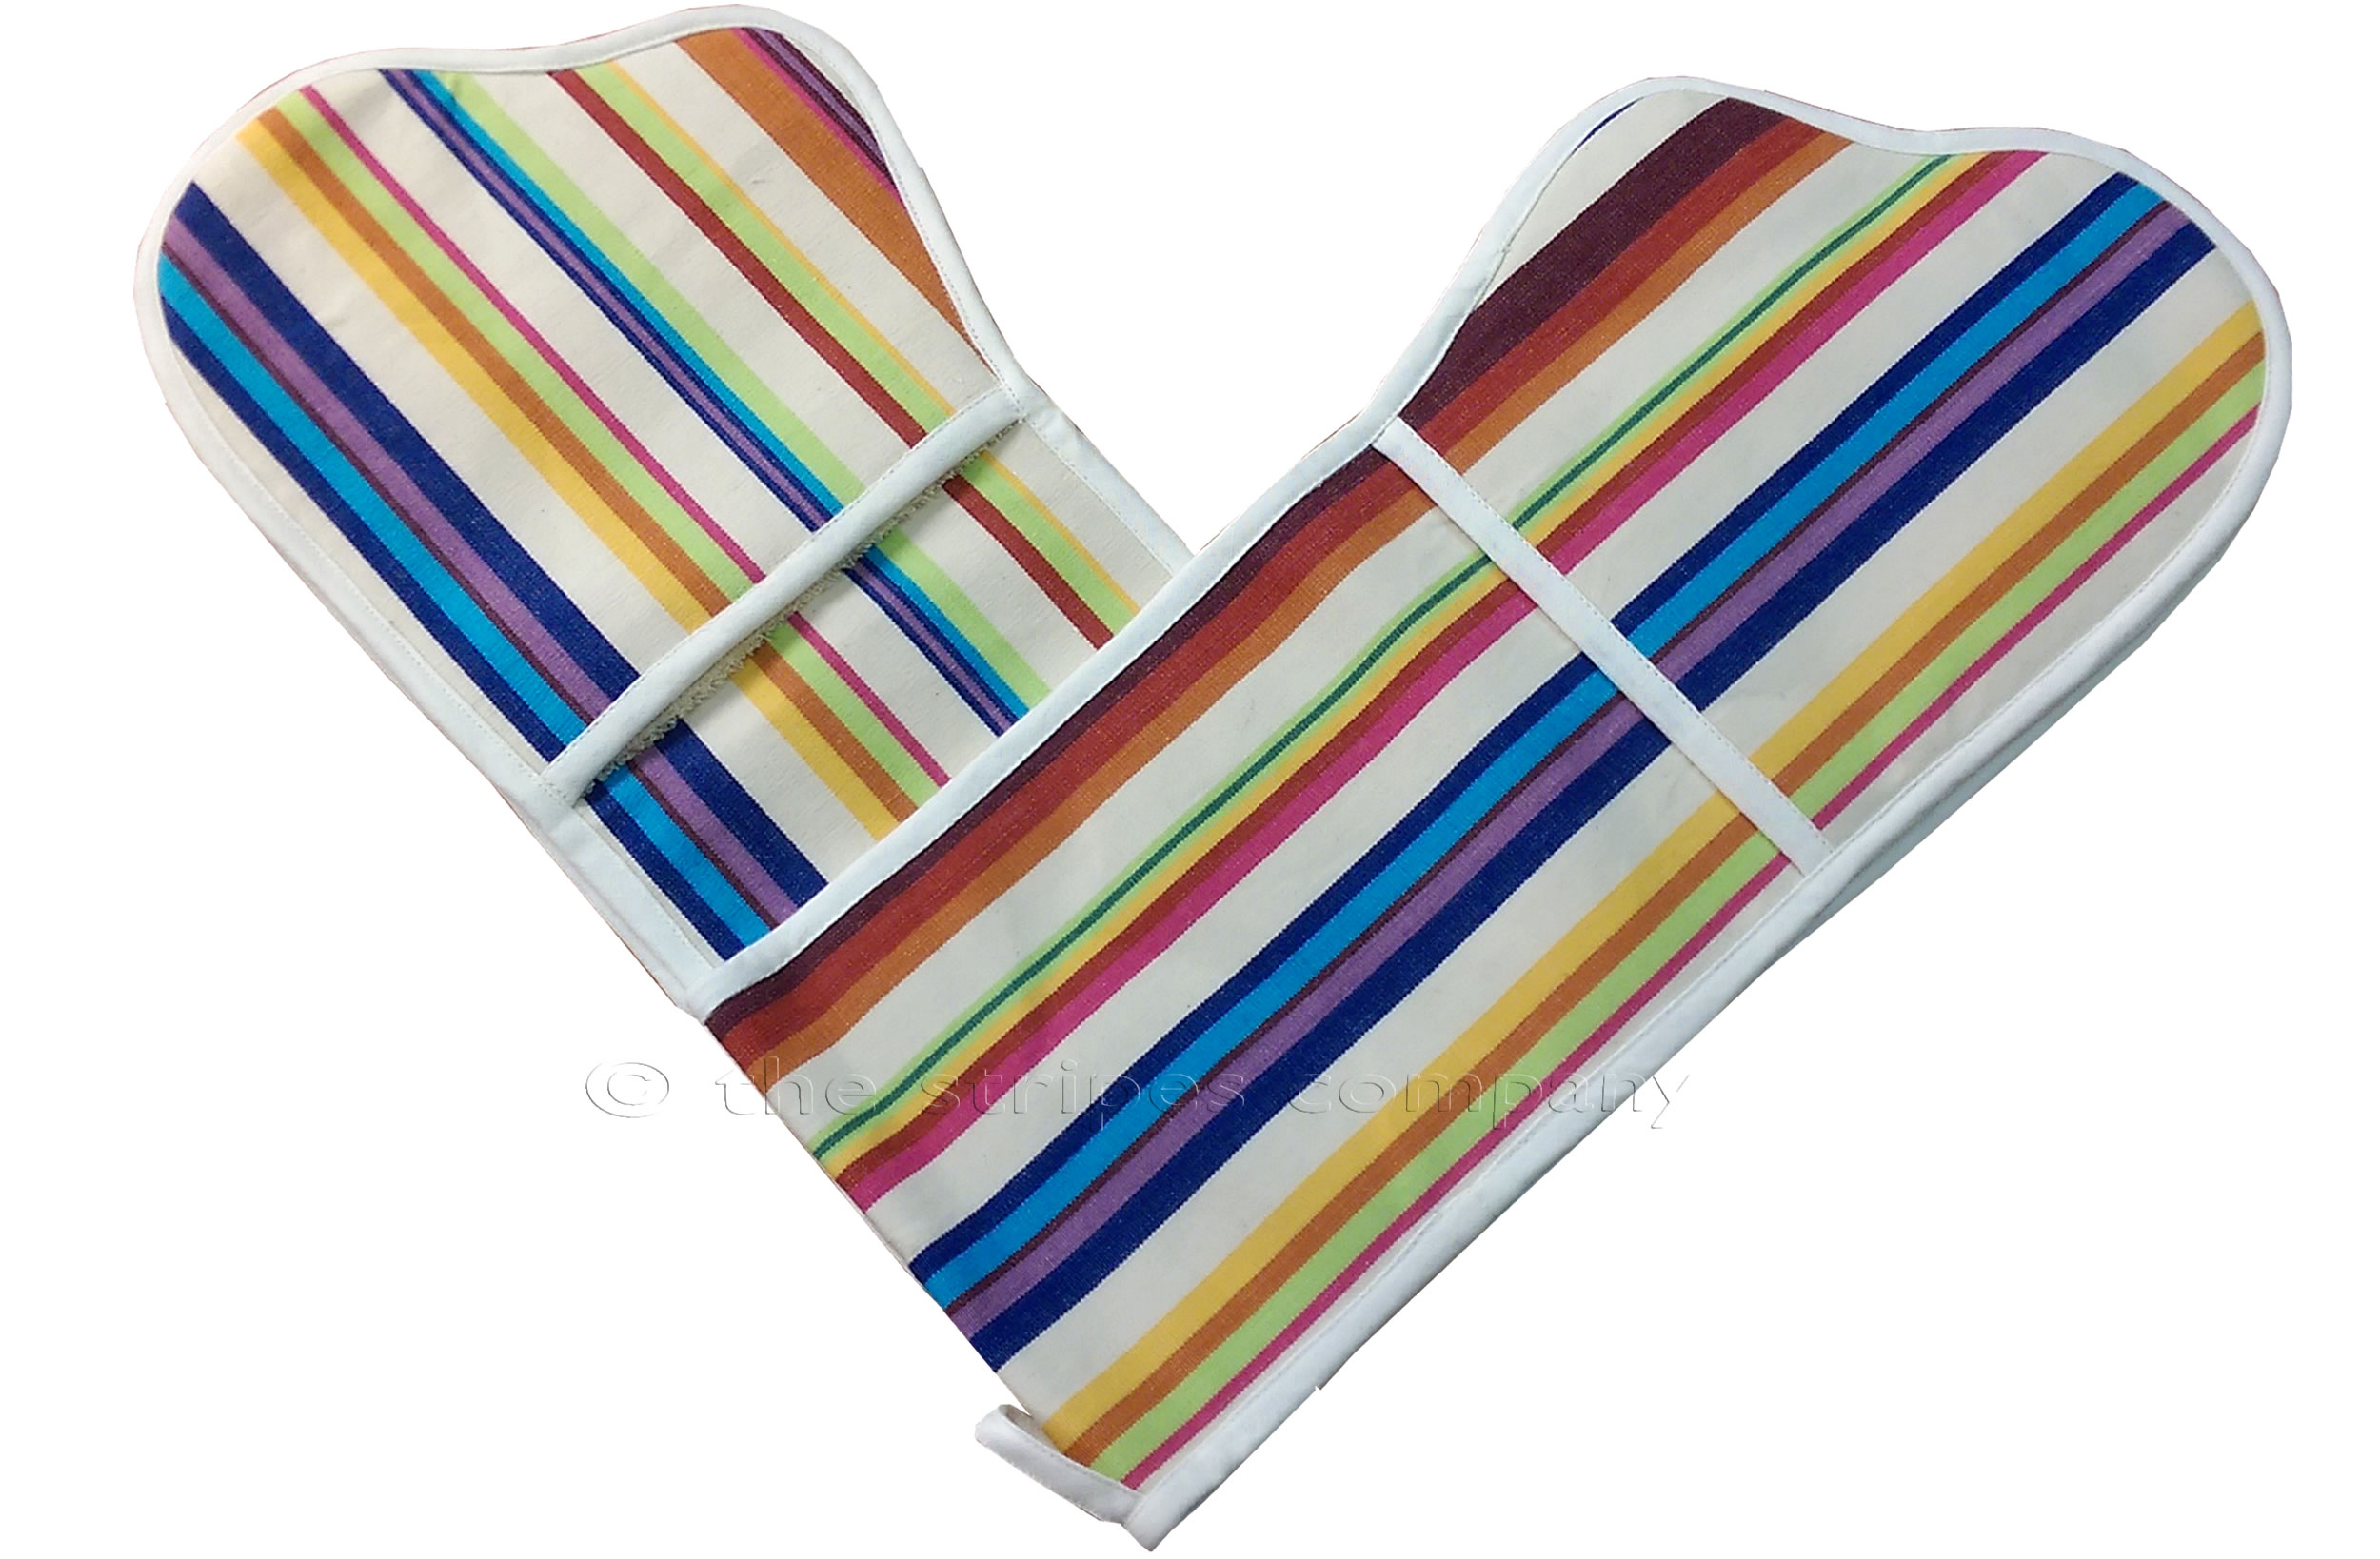 Cream Striped Oven Gloves | Double Oven Mitts Basketball Stripes